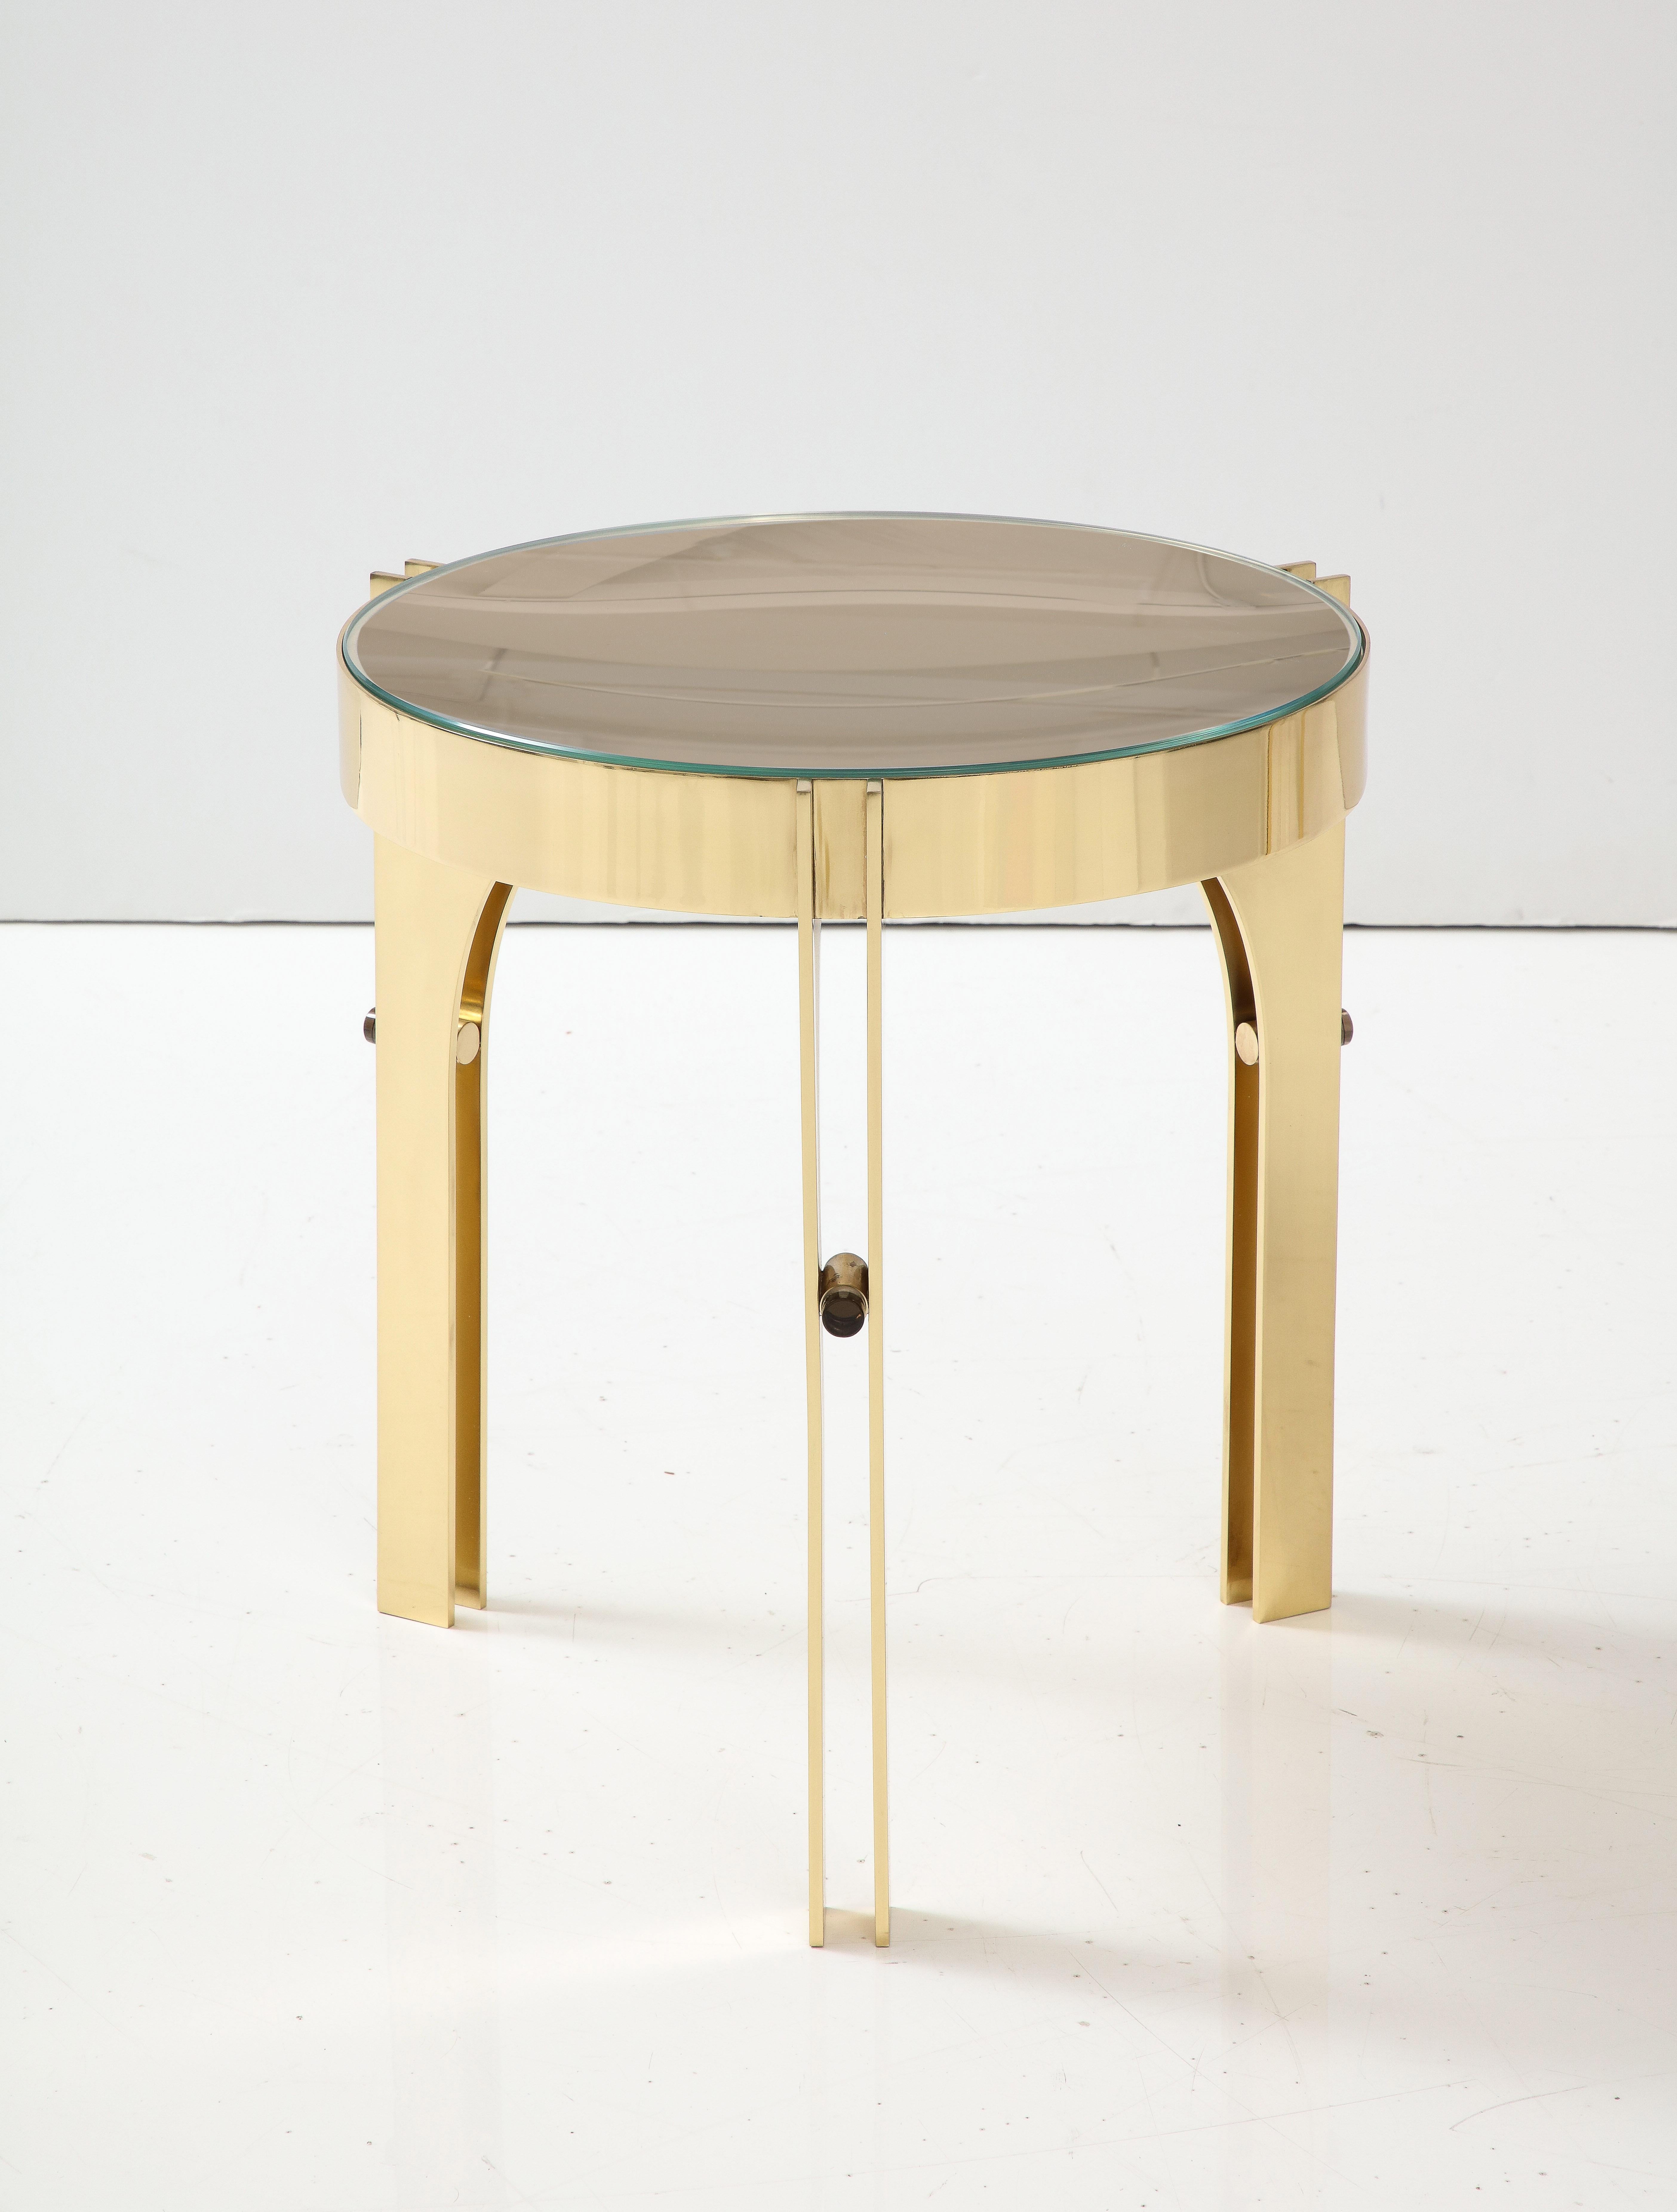 Bespoke and specially designed round martini drinks side table inspired by Max Ingrand Fontana Arte. This side table consists of a round structure in lacquered brass suspended by 3 architecturally designed brass legs. 12 mm round solid bronze glass